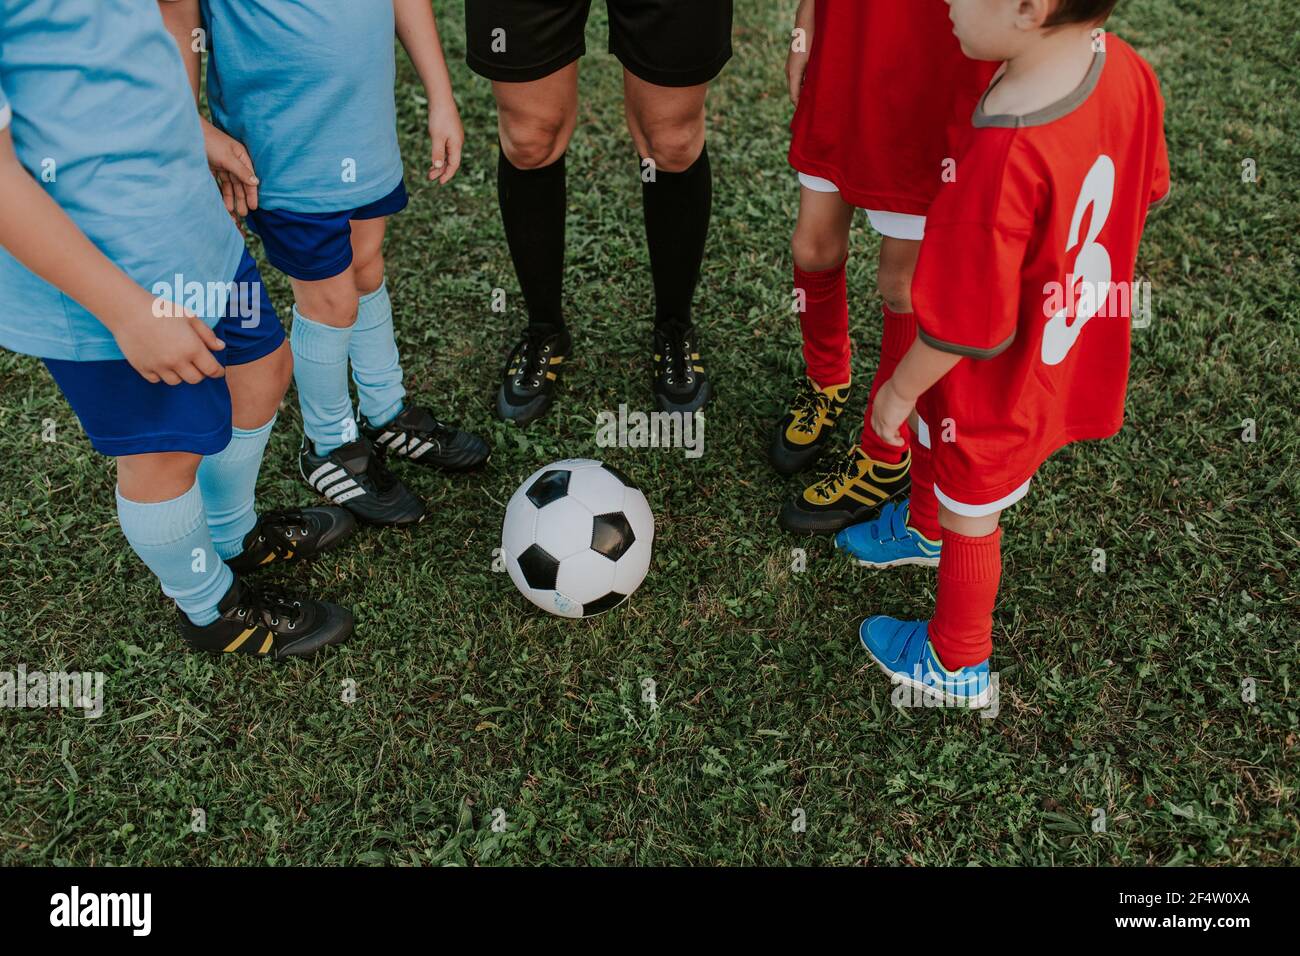 Football players and referee standing around ball on soccer field. Crop image of referee and children wearing blue and red soccer dresses. Stock Photo